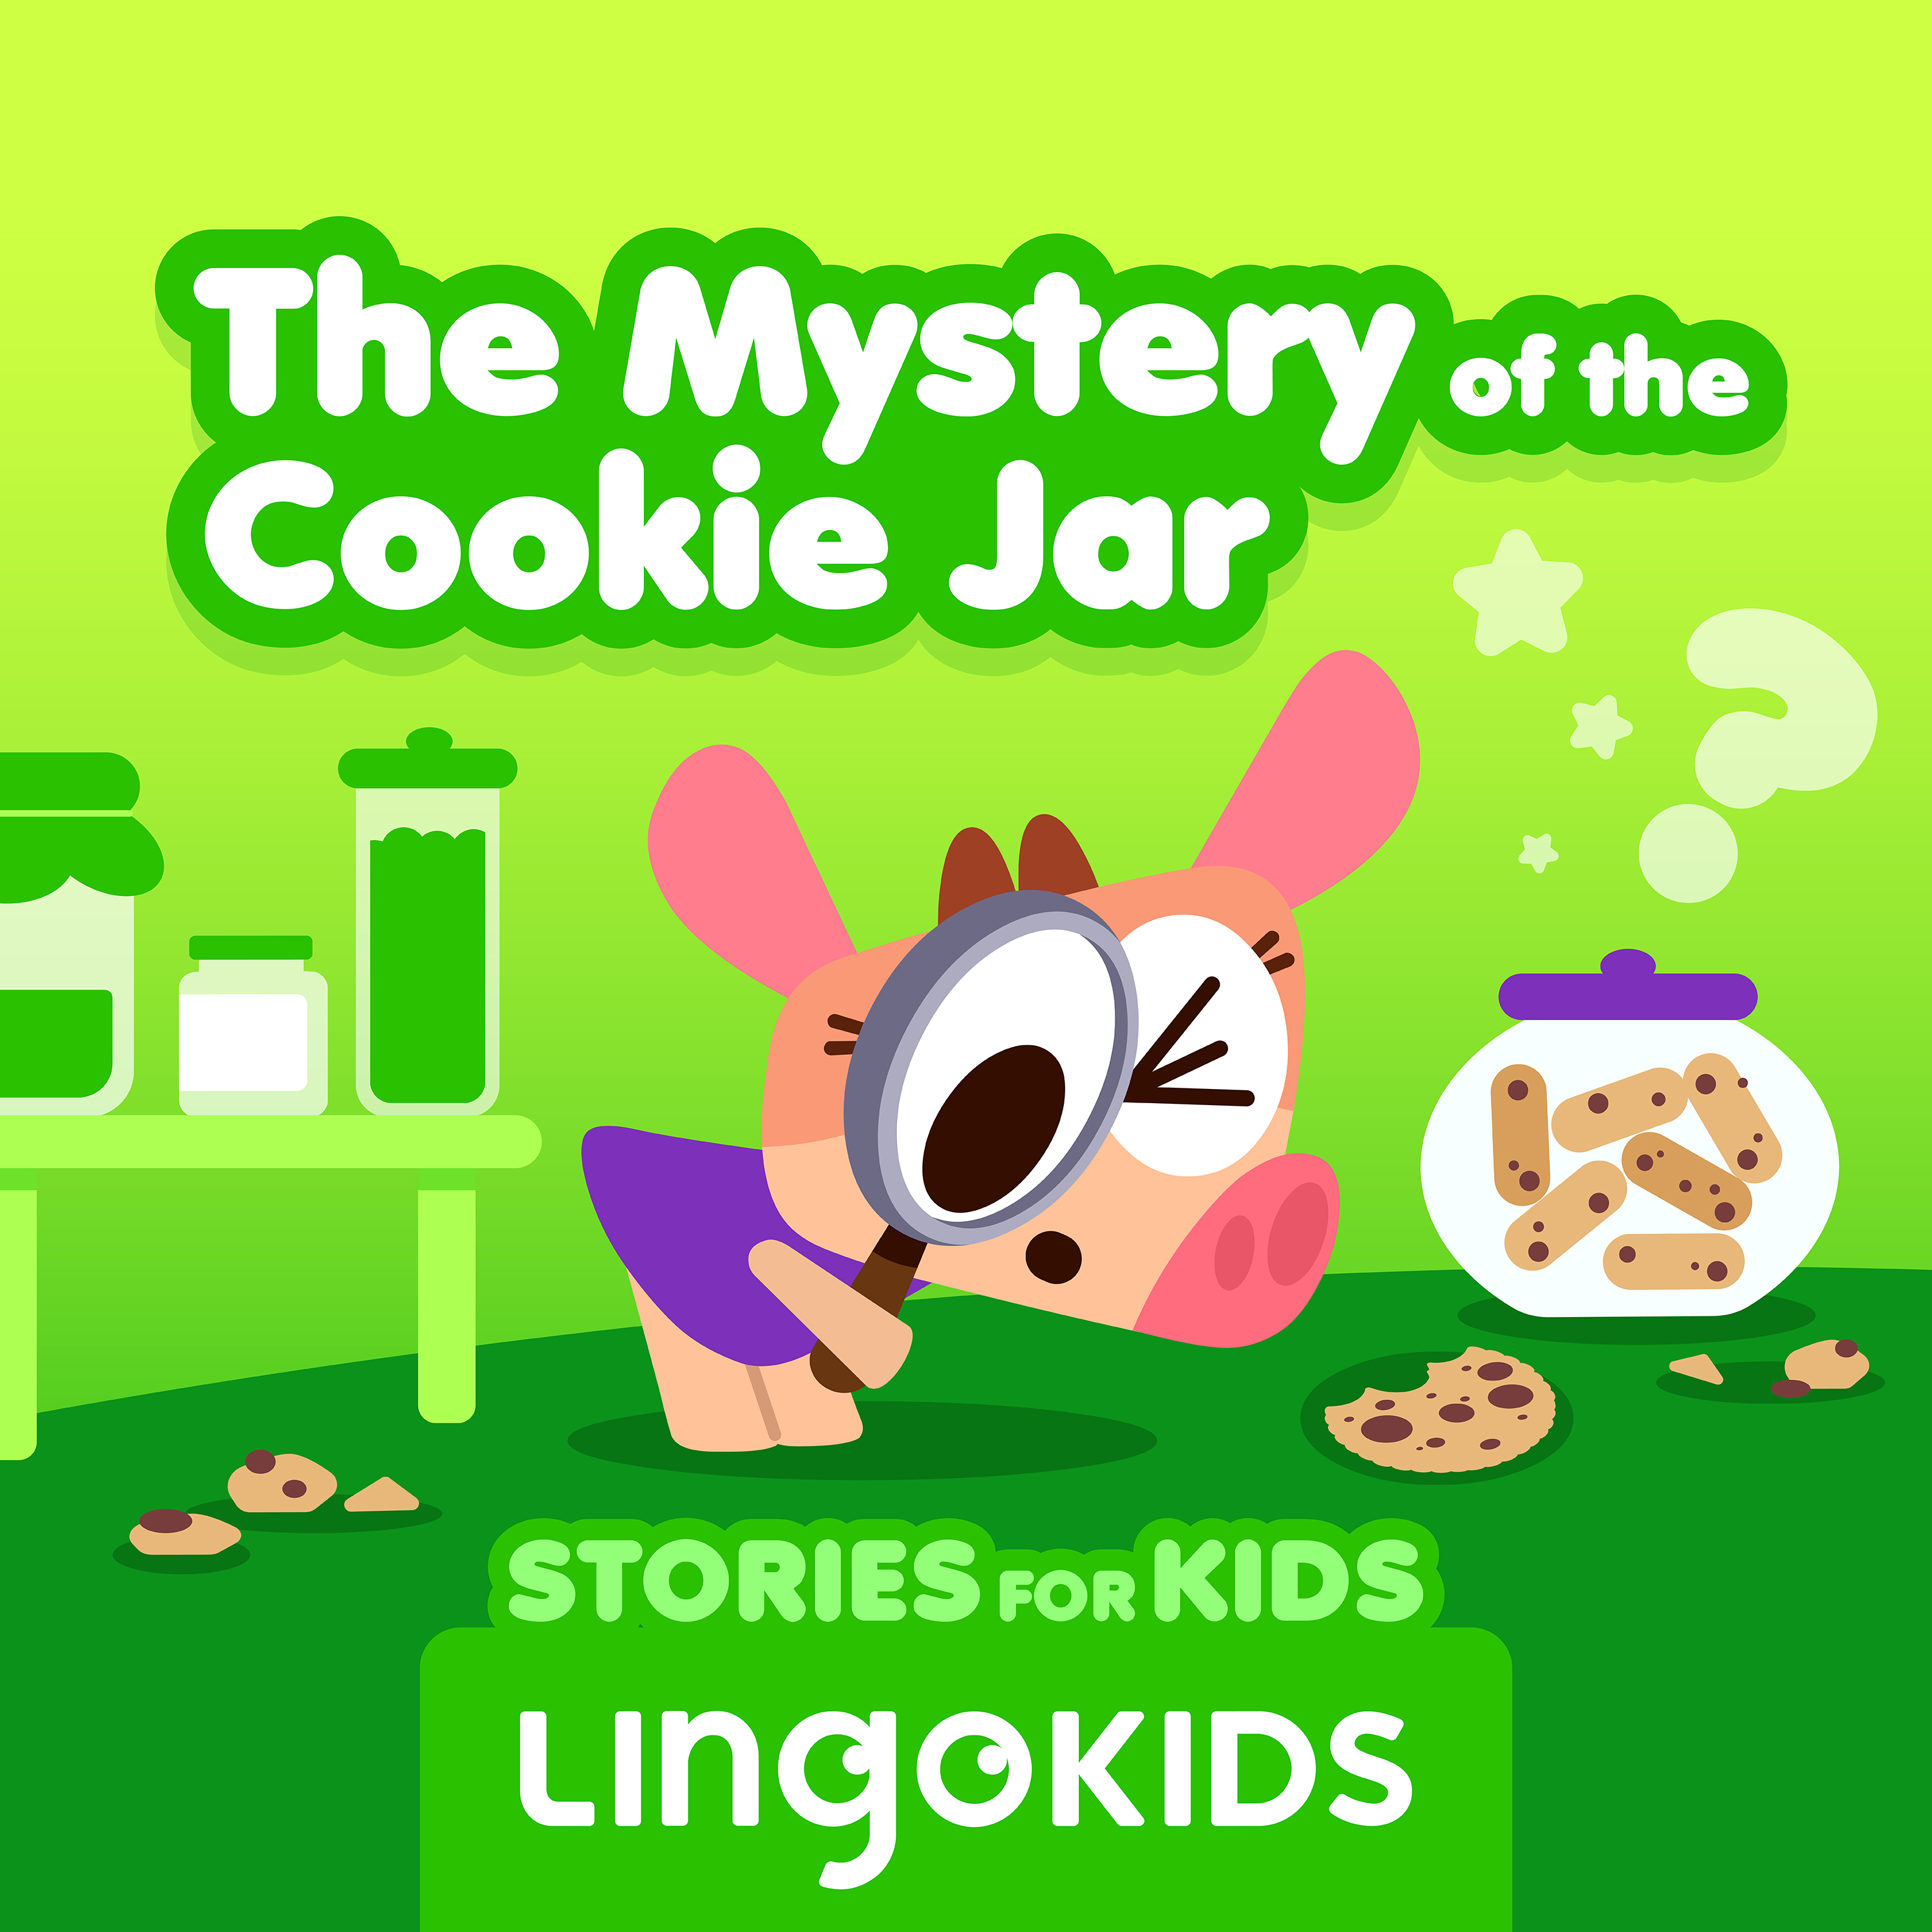 The Mistery of the Cookie Jar